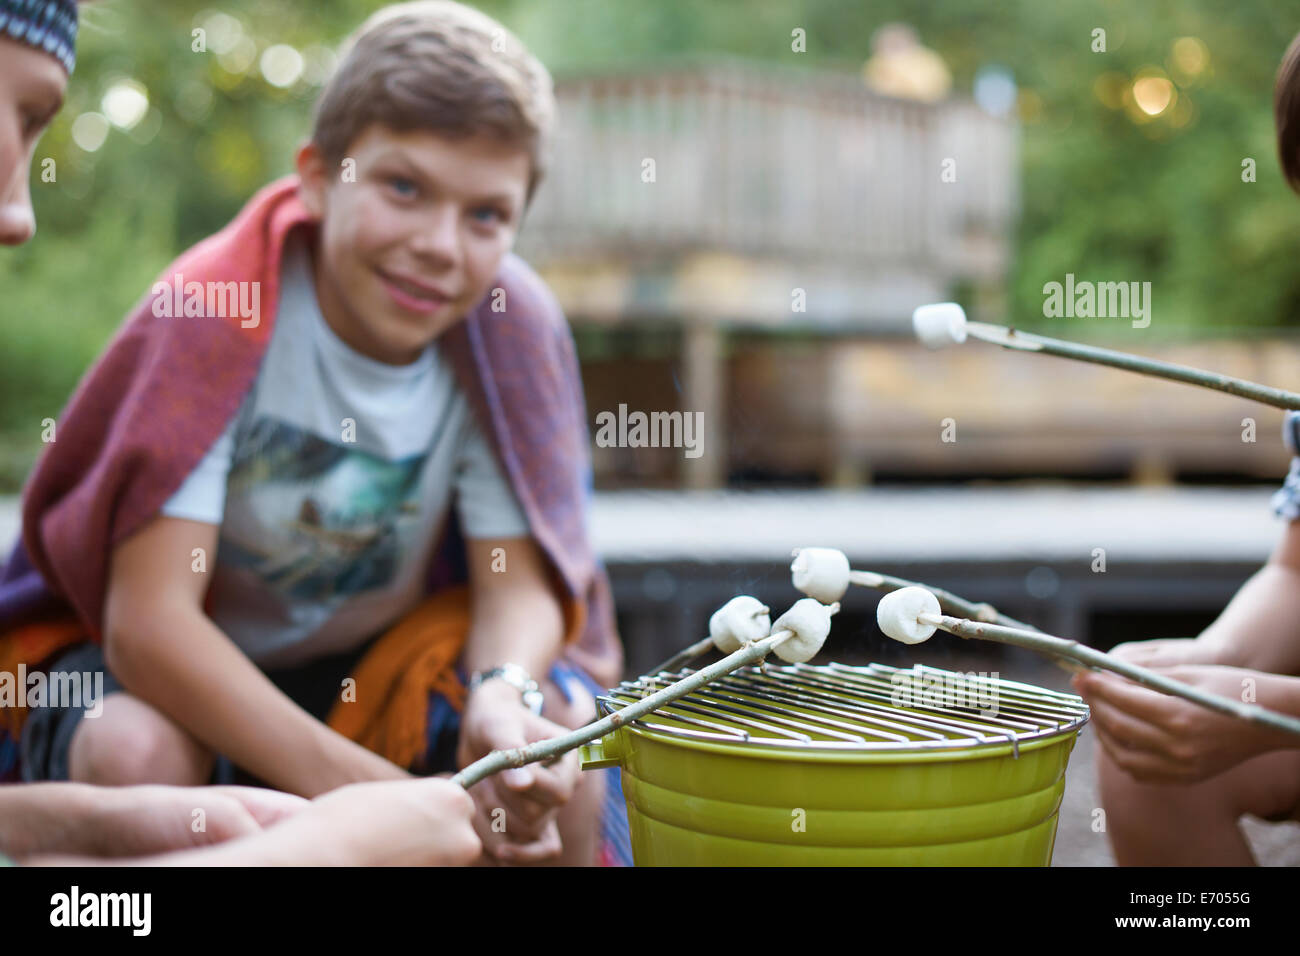 Group of young boys toasting marshmallows over bucket barbecue Stock Photo